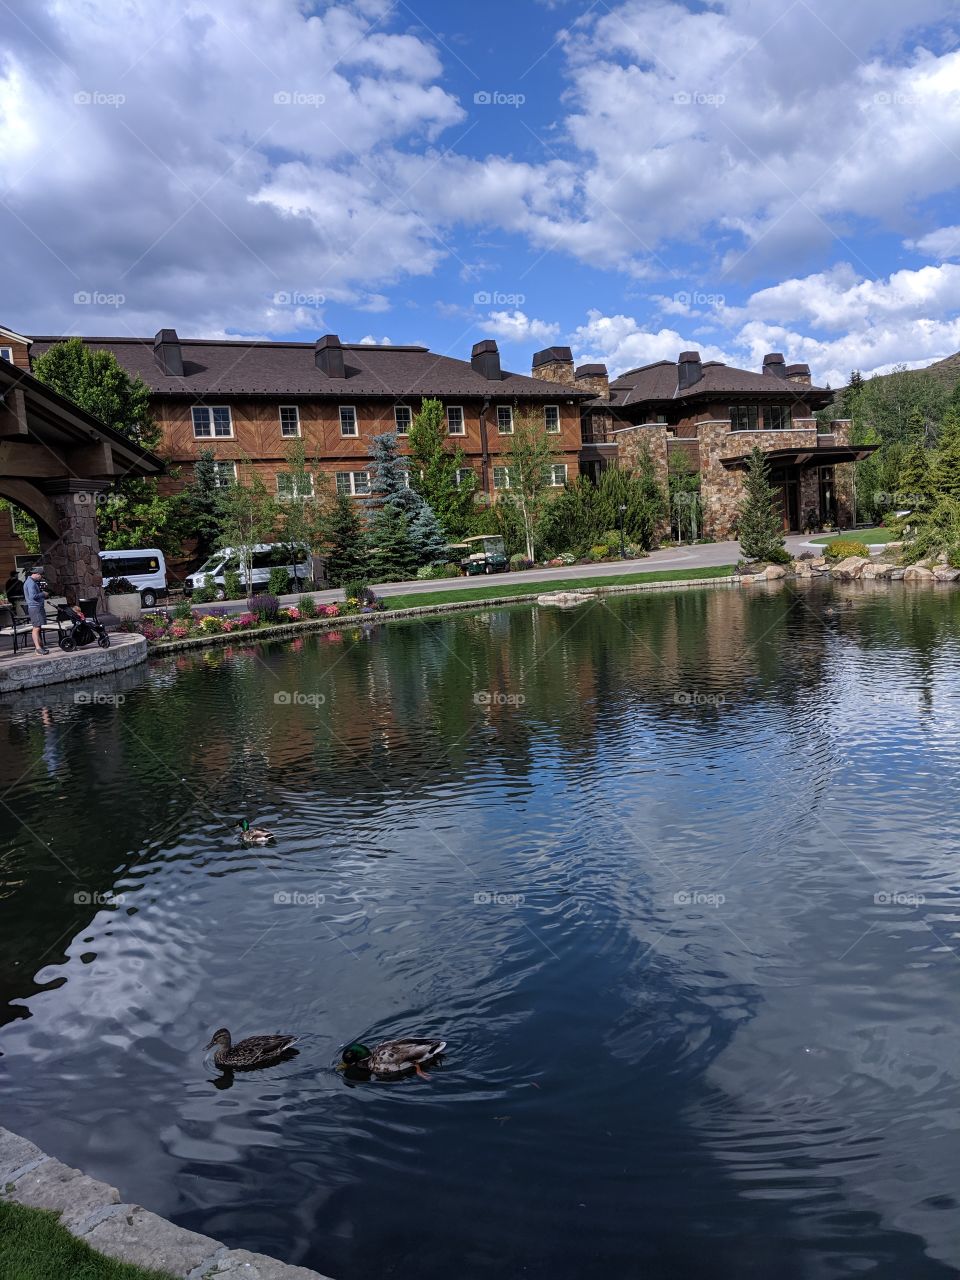 The Sun Valley Lodge